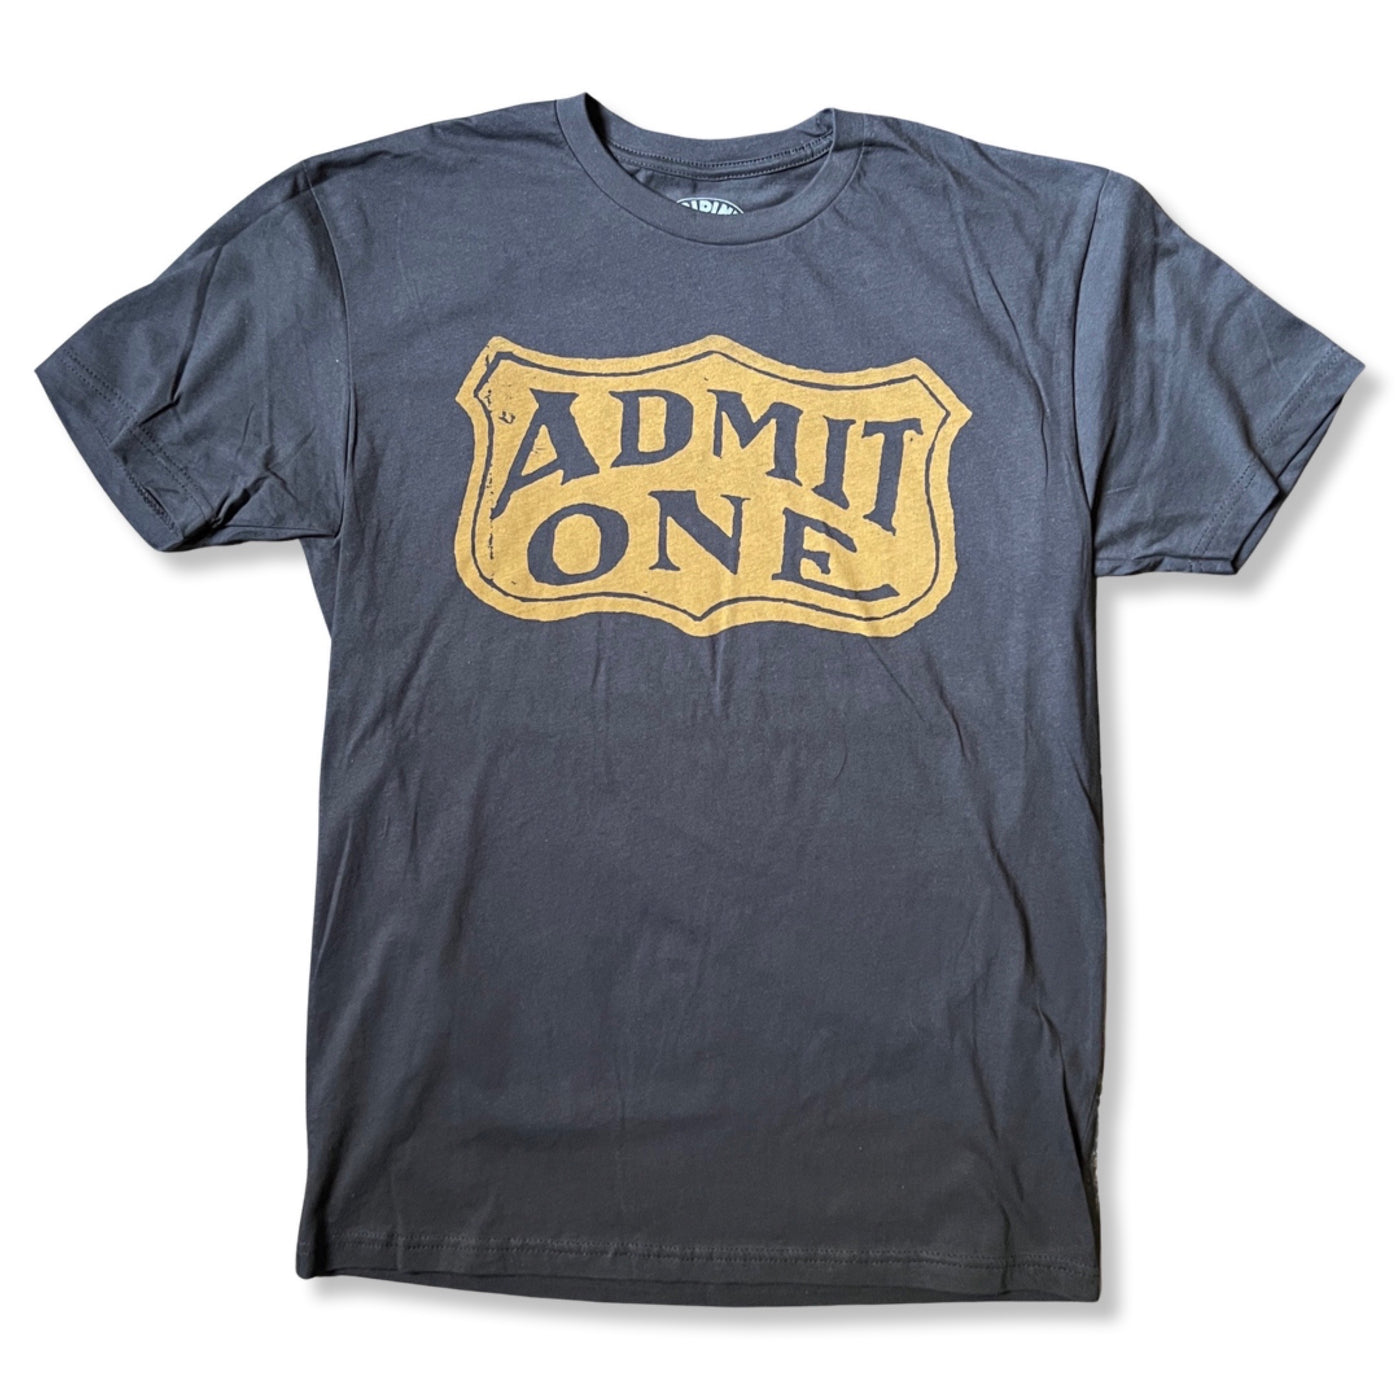 Admit One Tee by Ridin' High